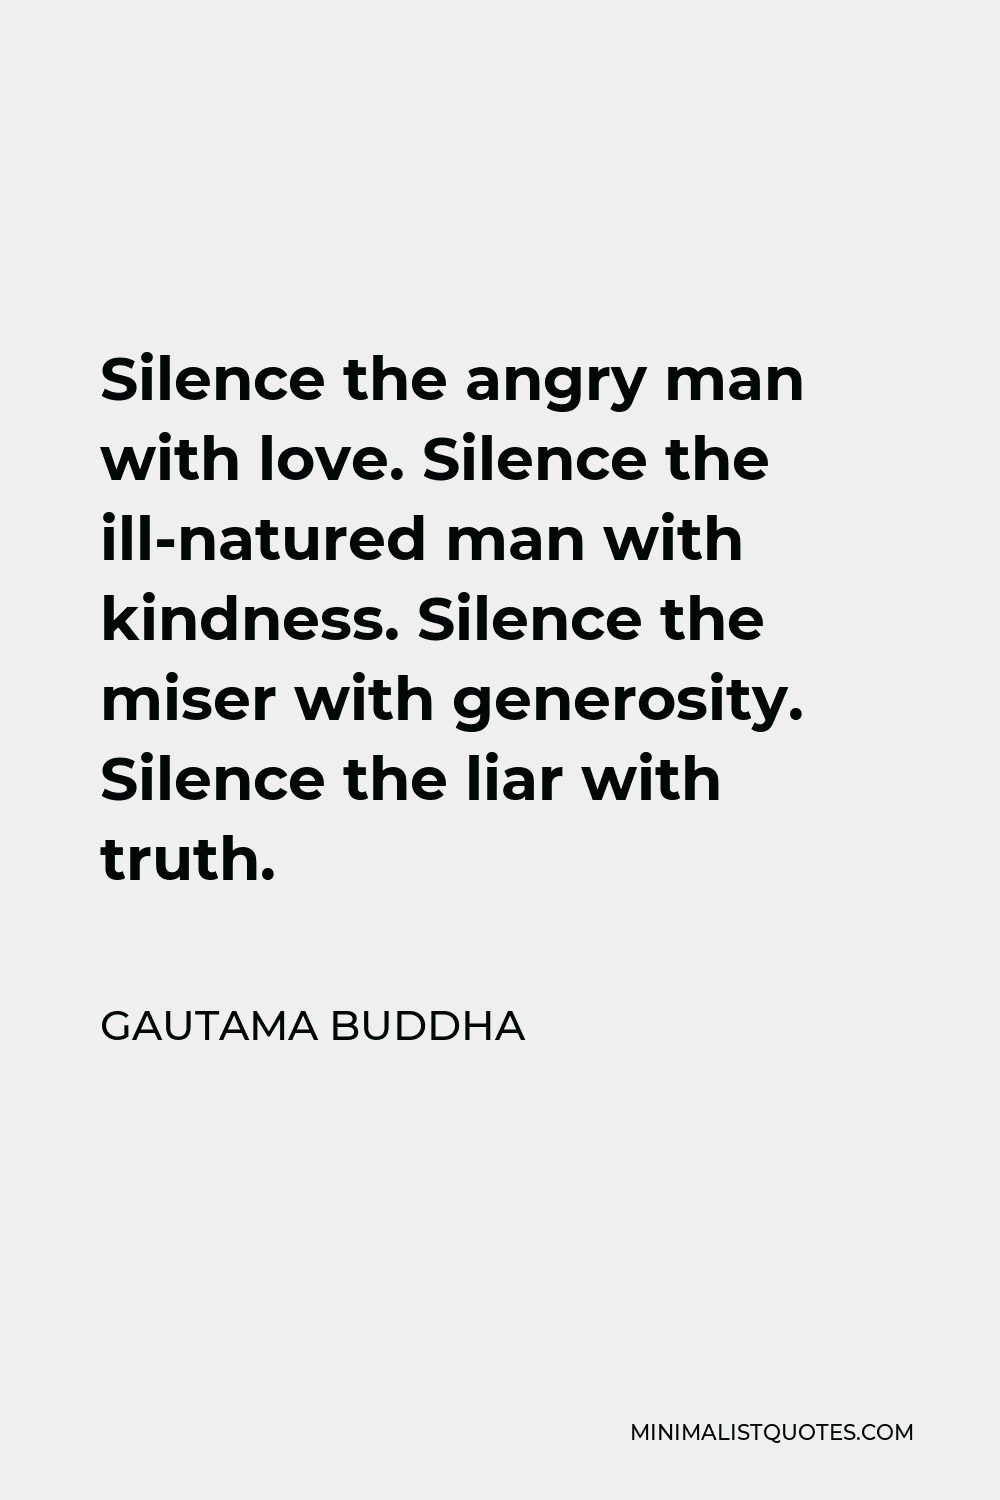 Gautama Buddha Quote - Silence the angry man with love. Silence the ill-natured man with kindness. Silence the miser with generosity. Silence the liar with truth.